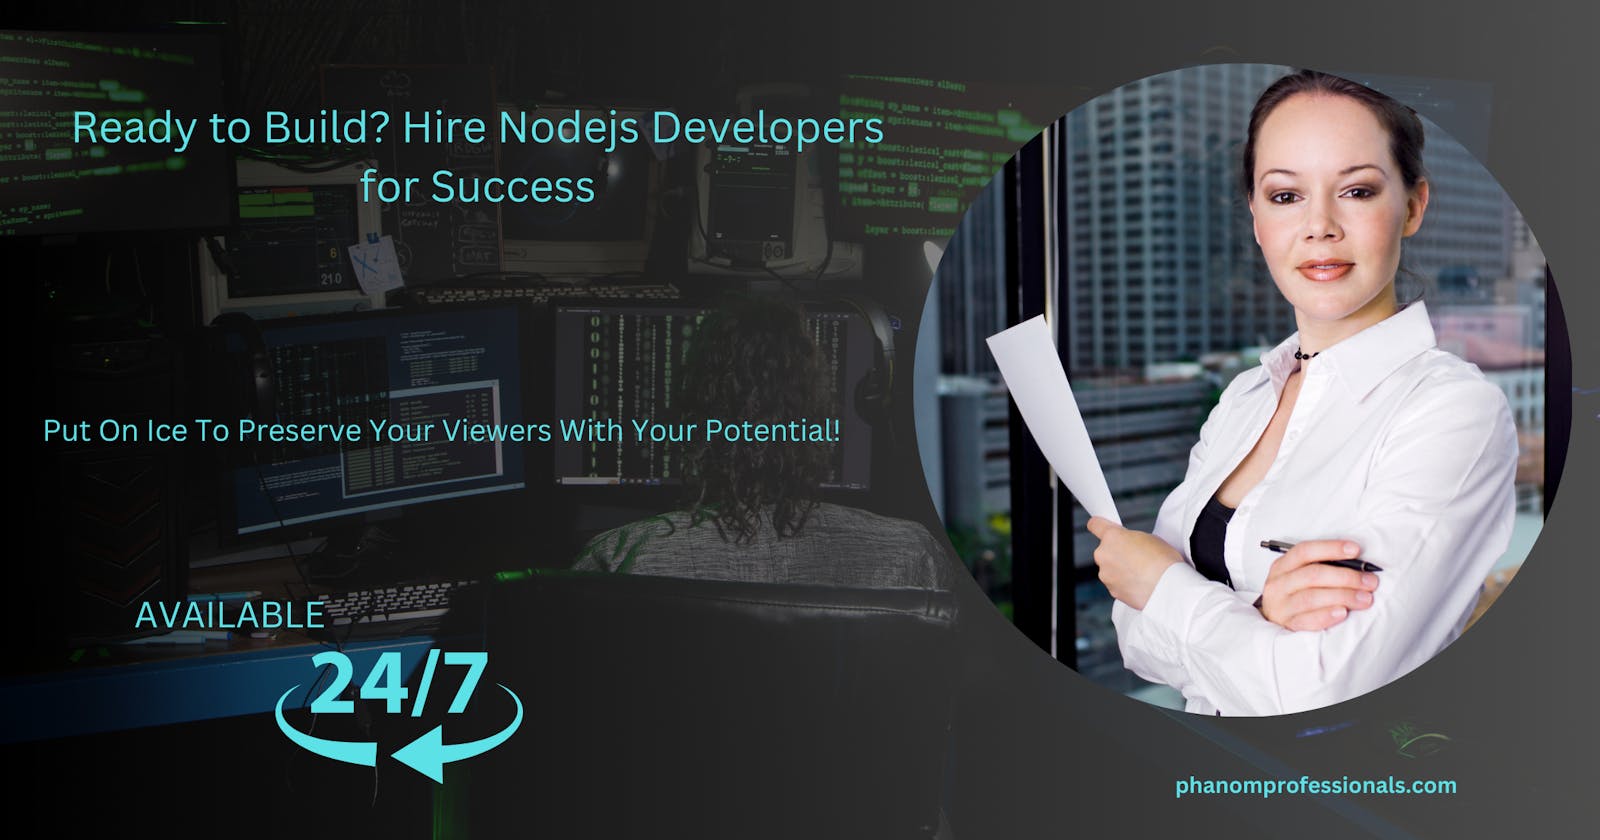 Ready to Build? Hire Nodejs Developers for Success